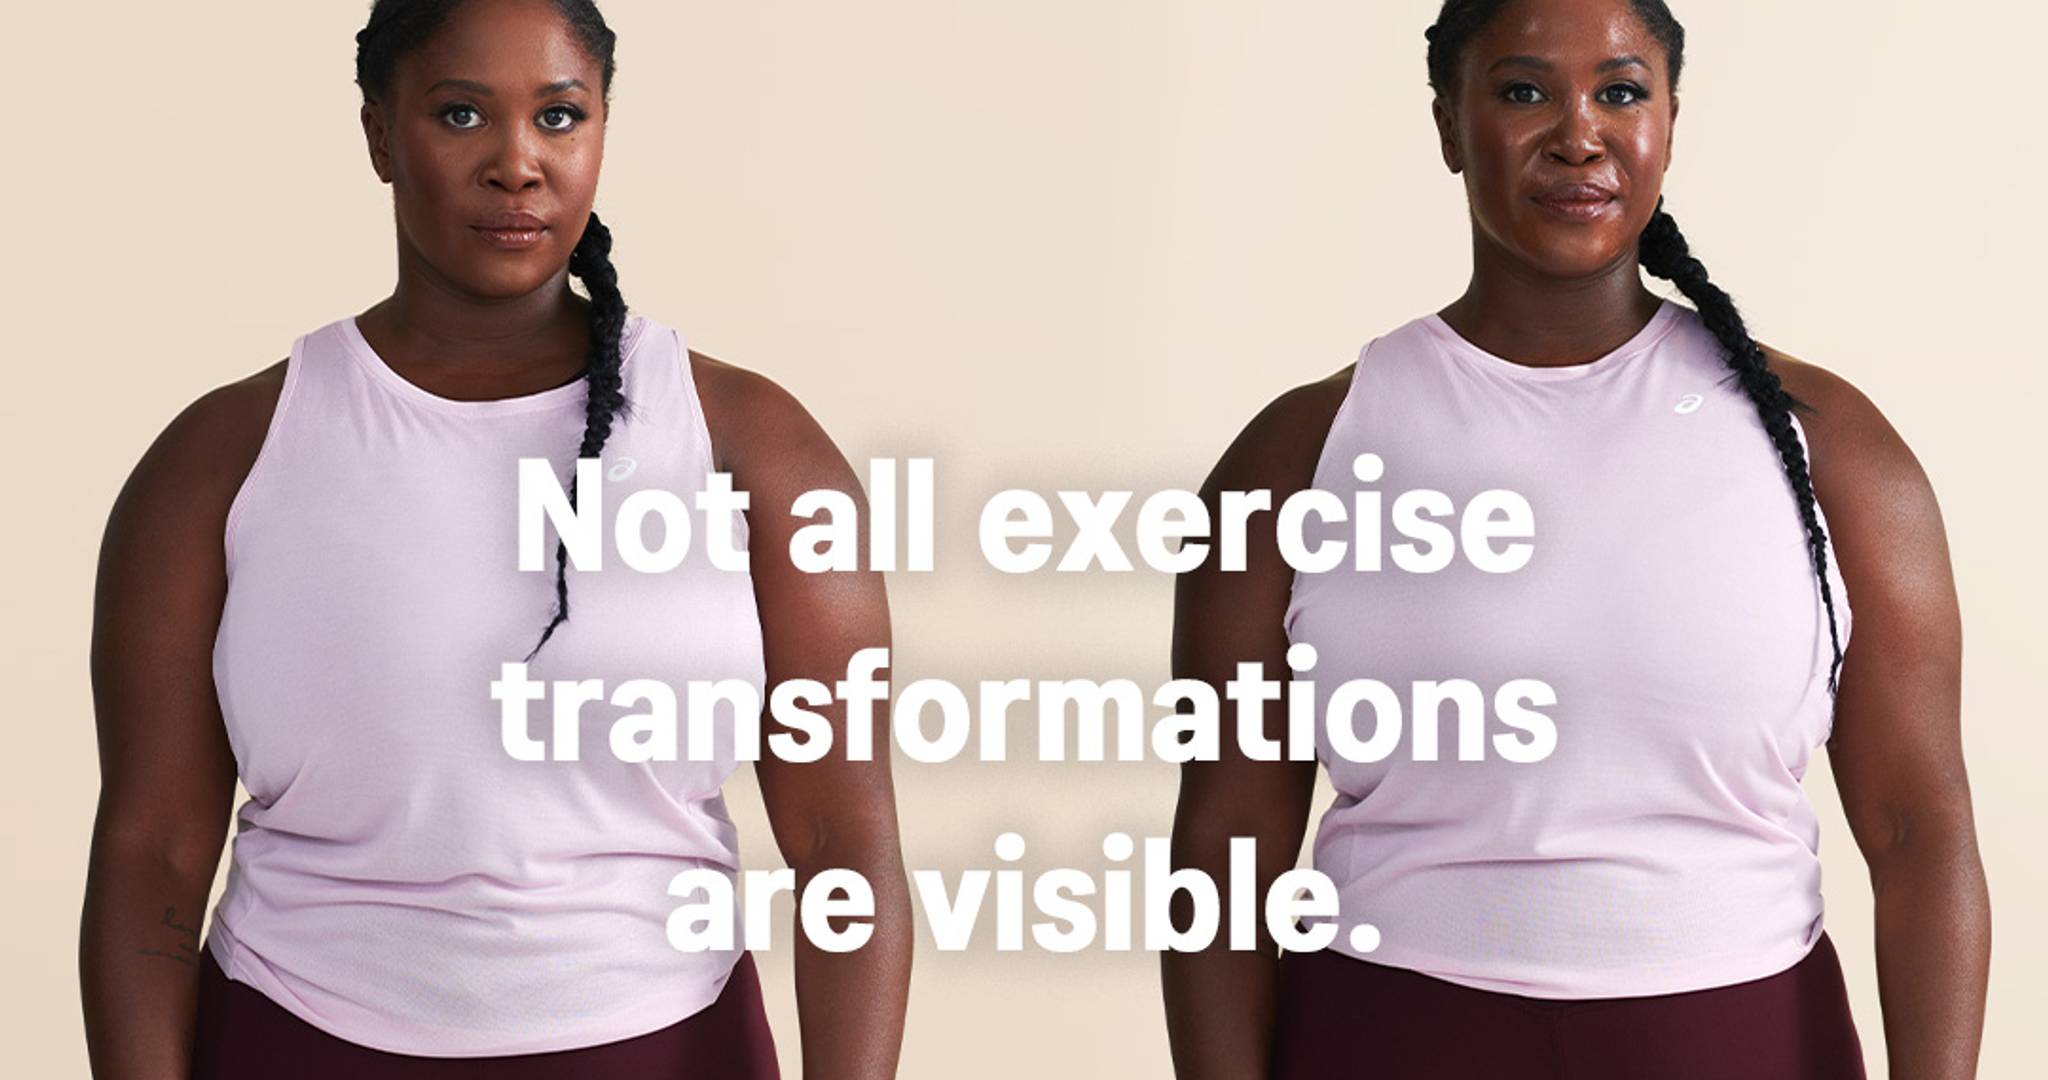 Asics focuses on the transforming the mind, not the body